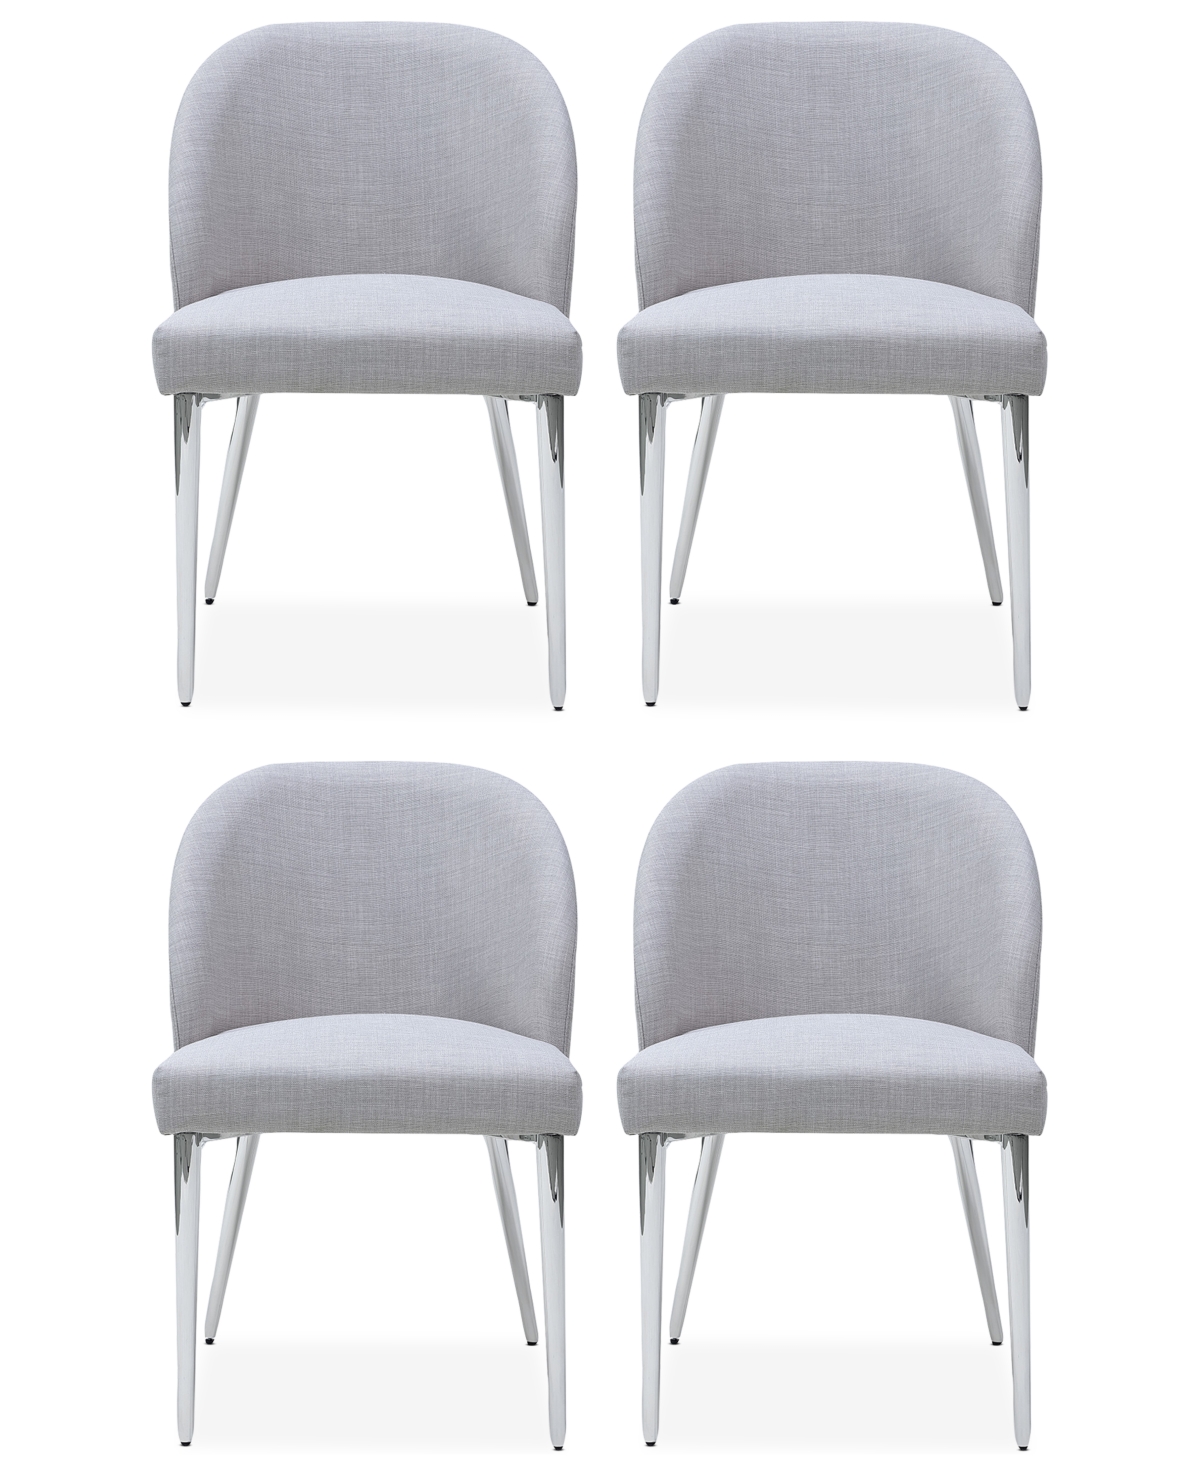 Furniture Marilyn Dining Chair 4pc Set